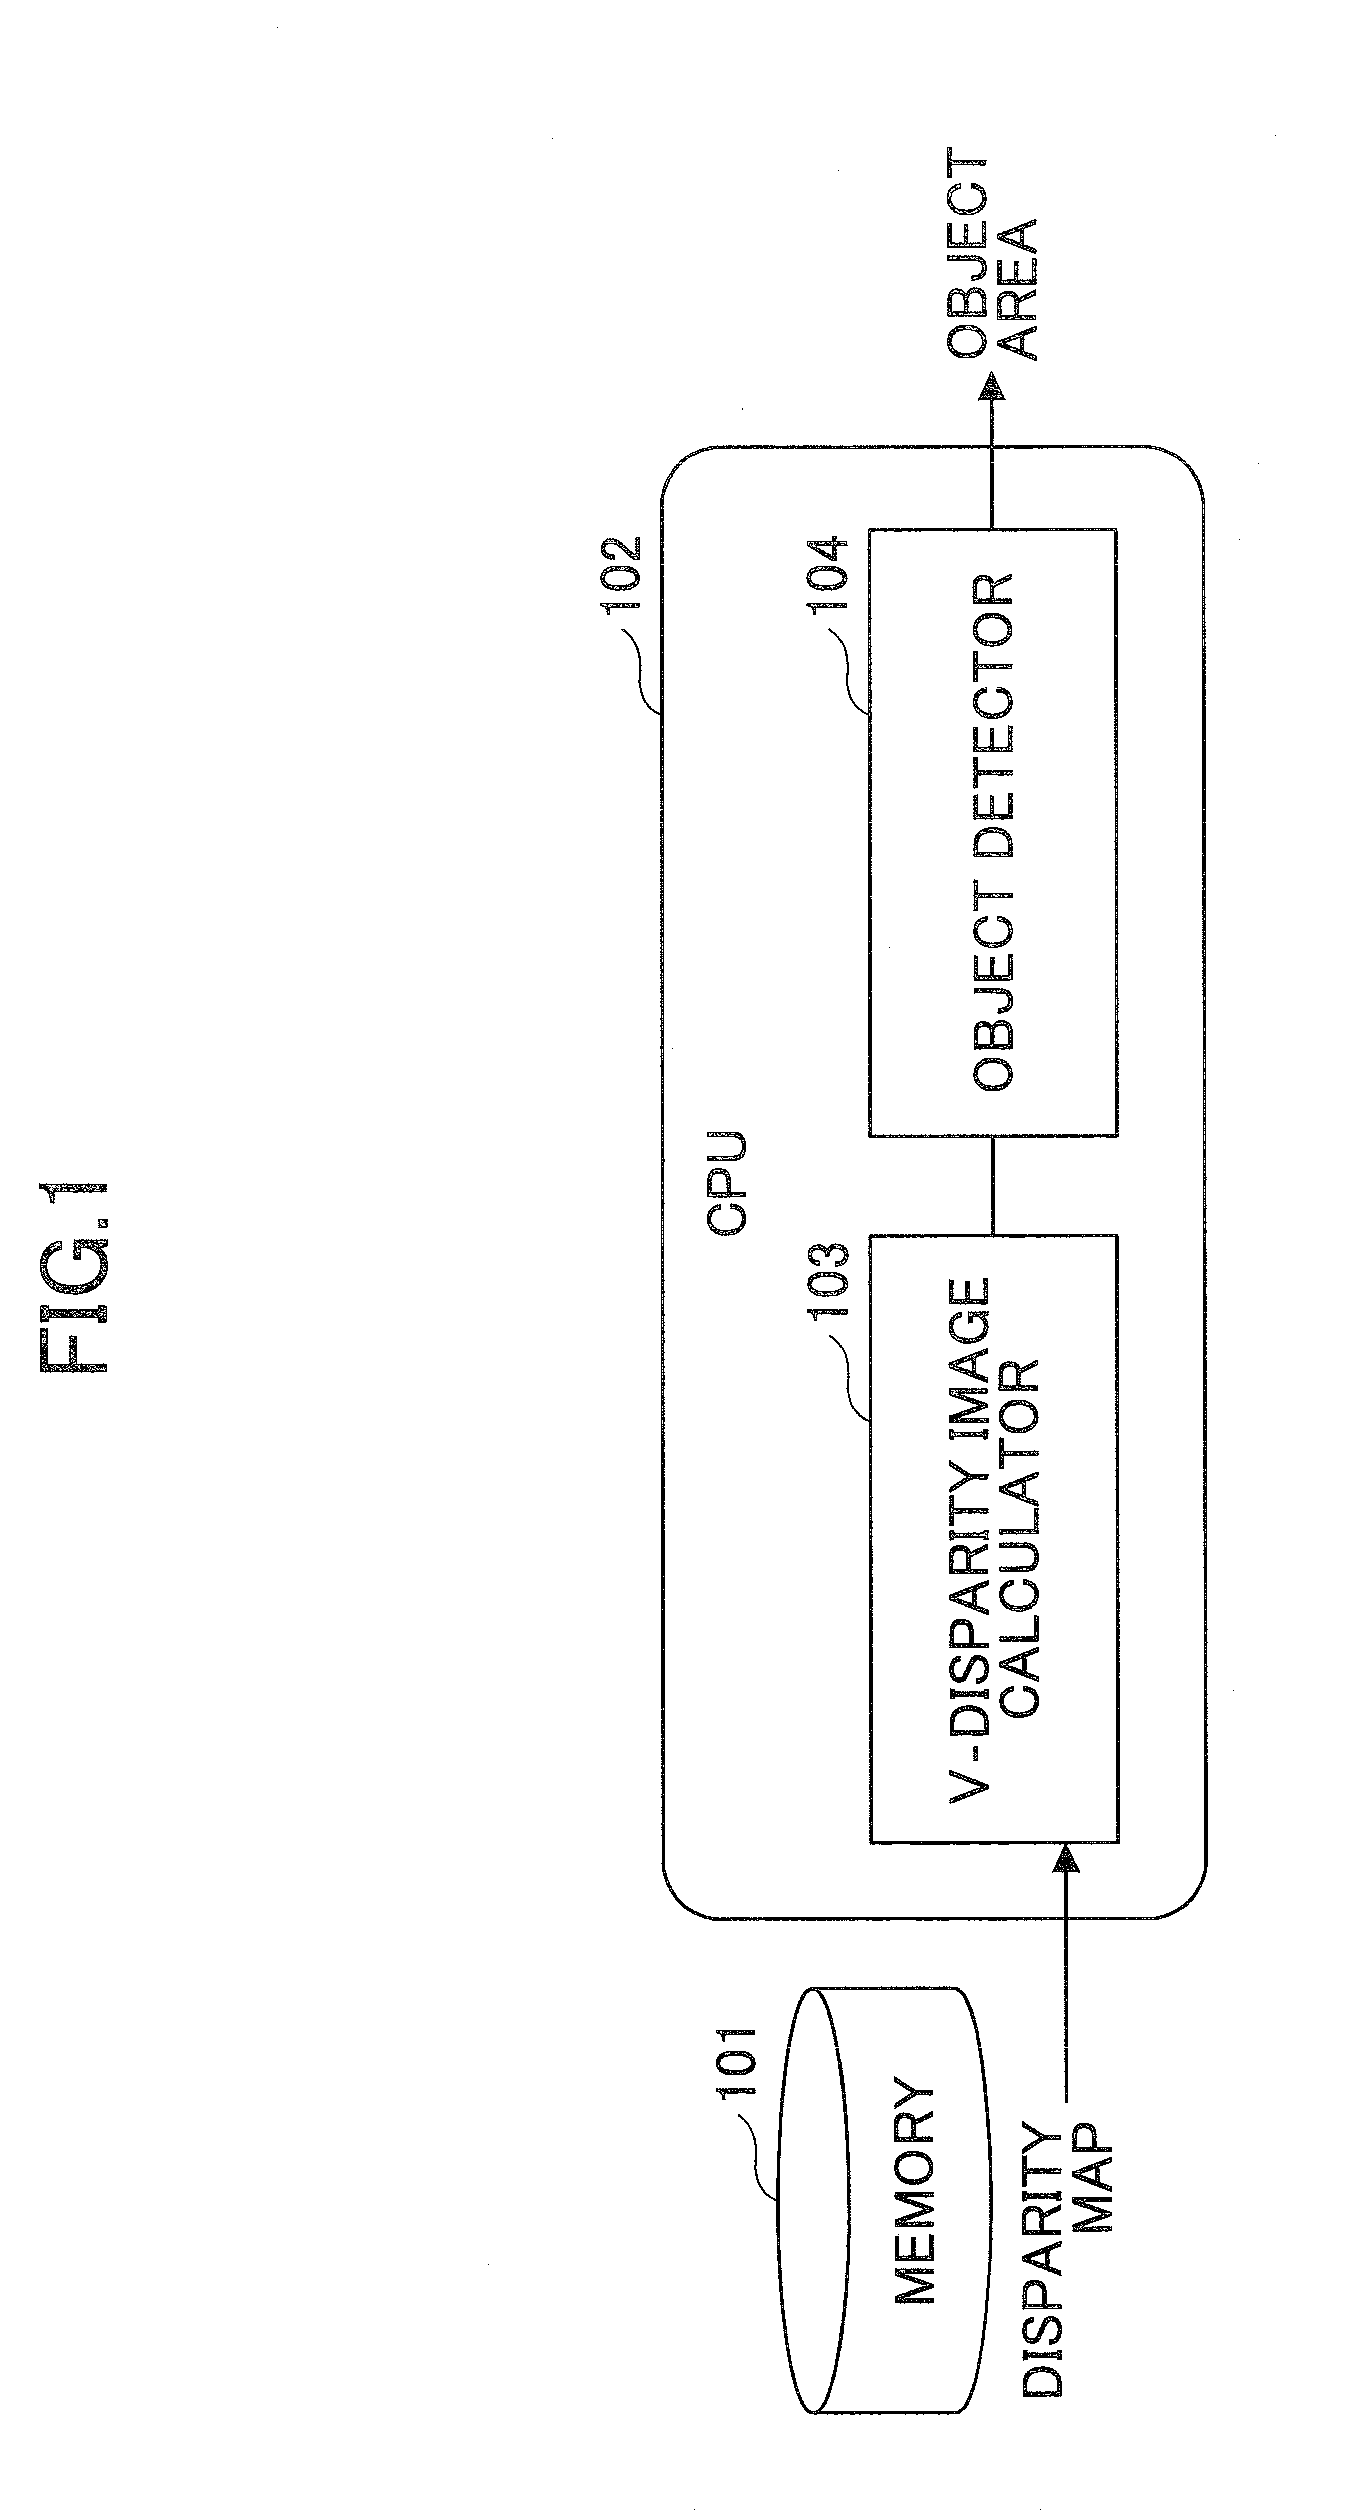 Method and system for detecting object on a road